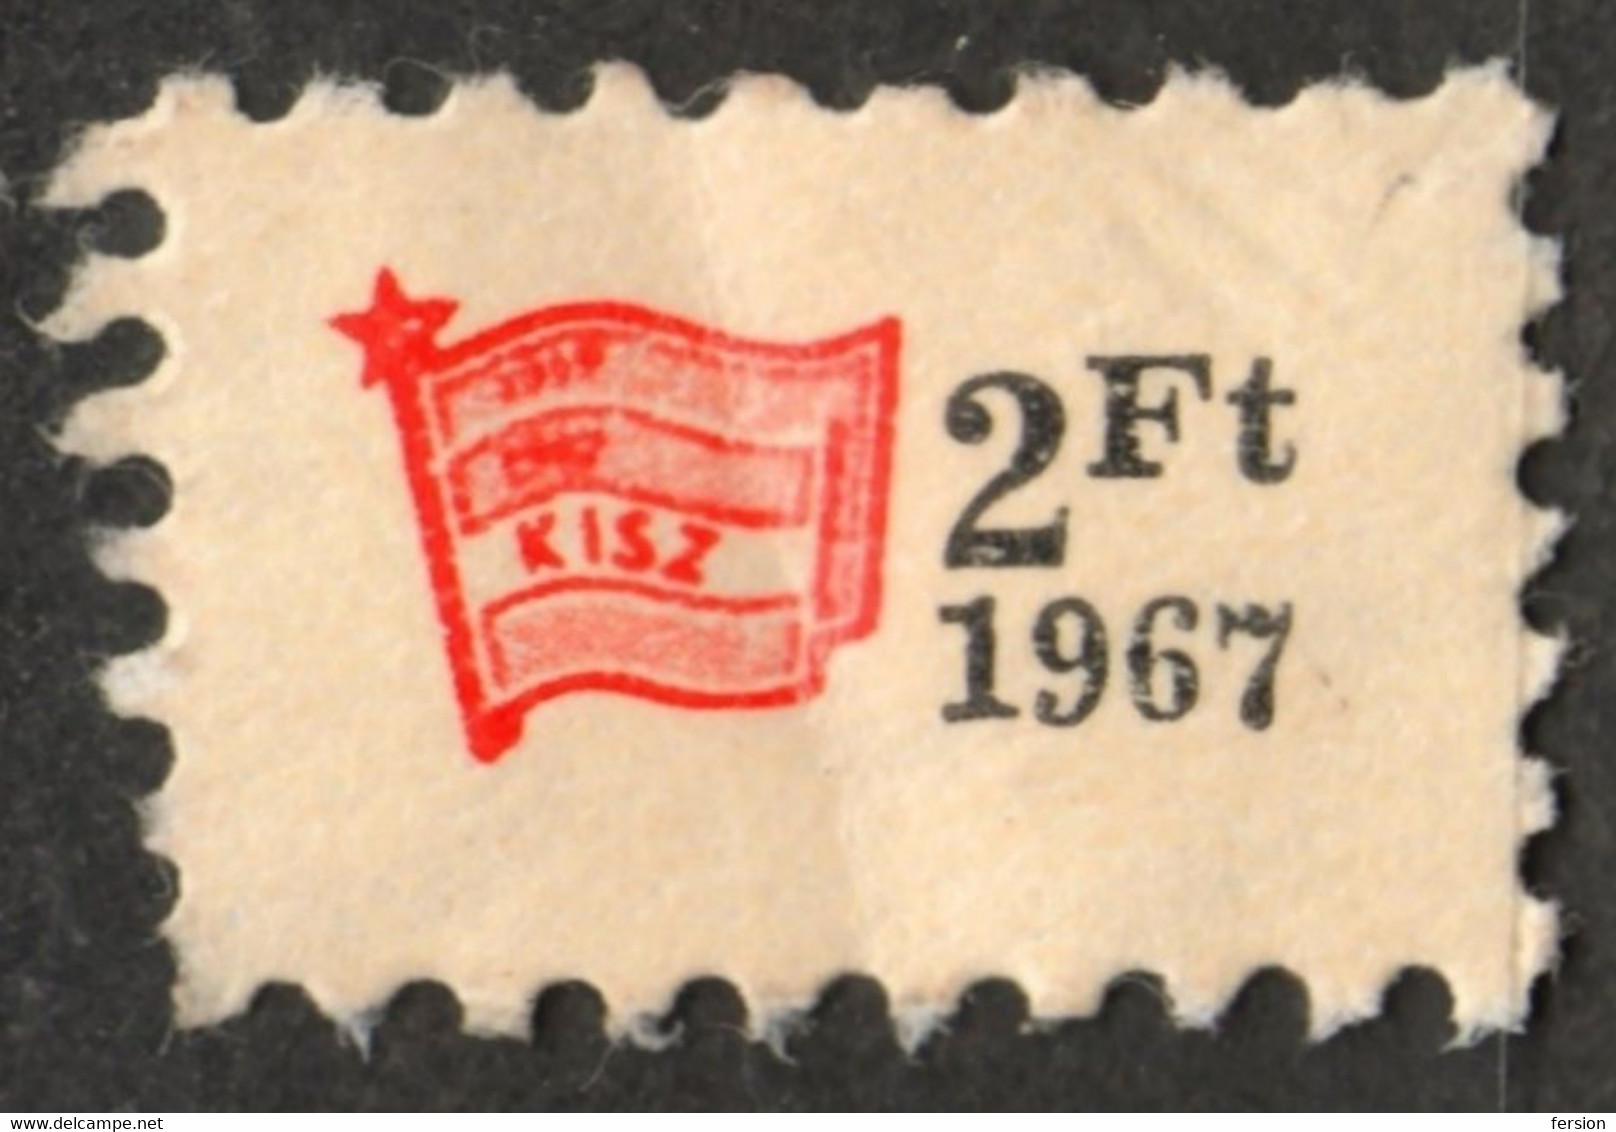 KISZ Hungarian Young Communist League FLAG Red Star - Member Charity LABEL CINDERELLA VIGNETTE - Hungary 1967 - Service